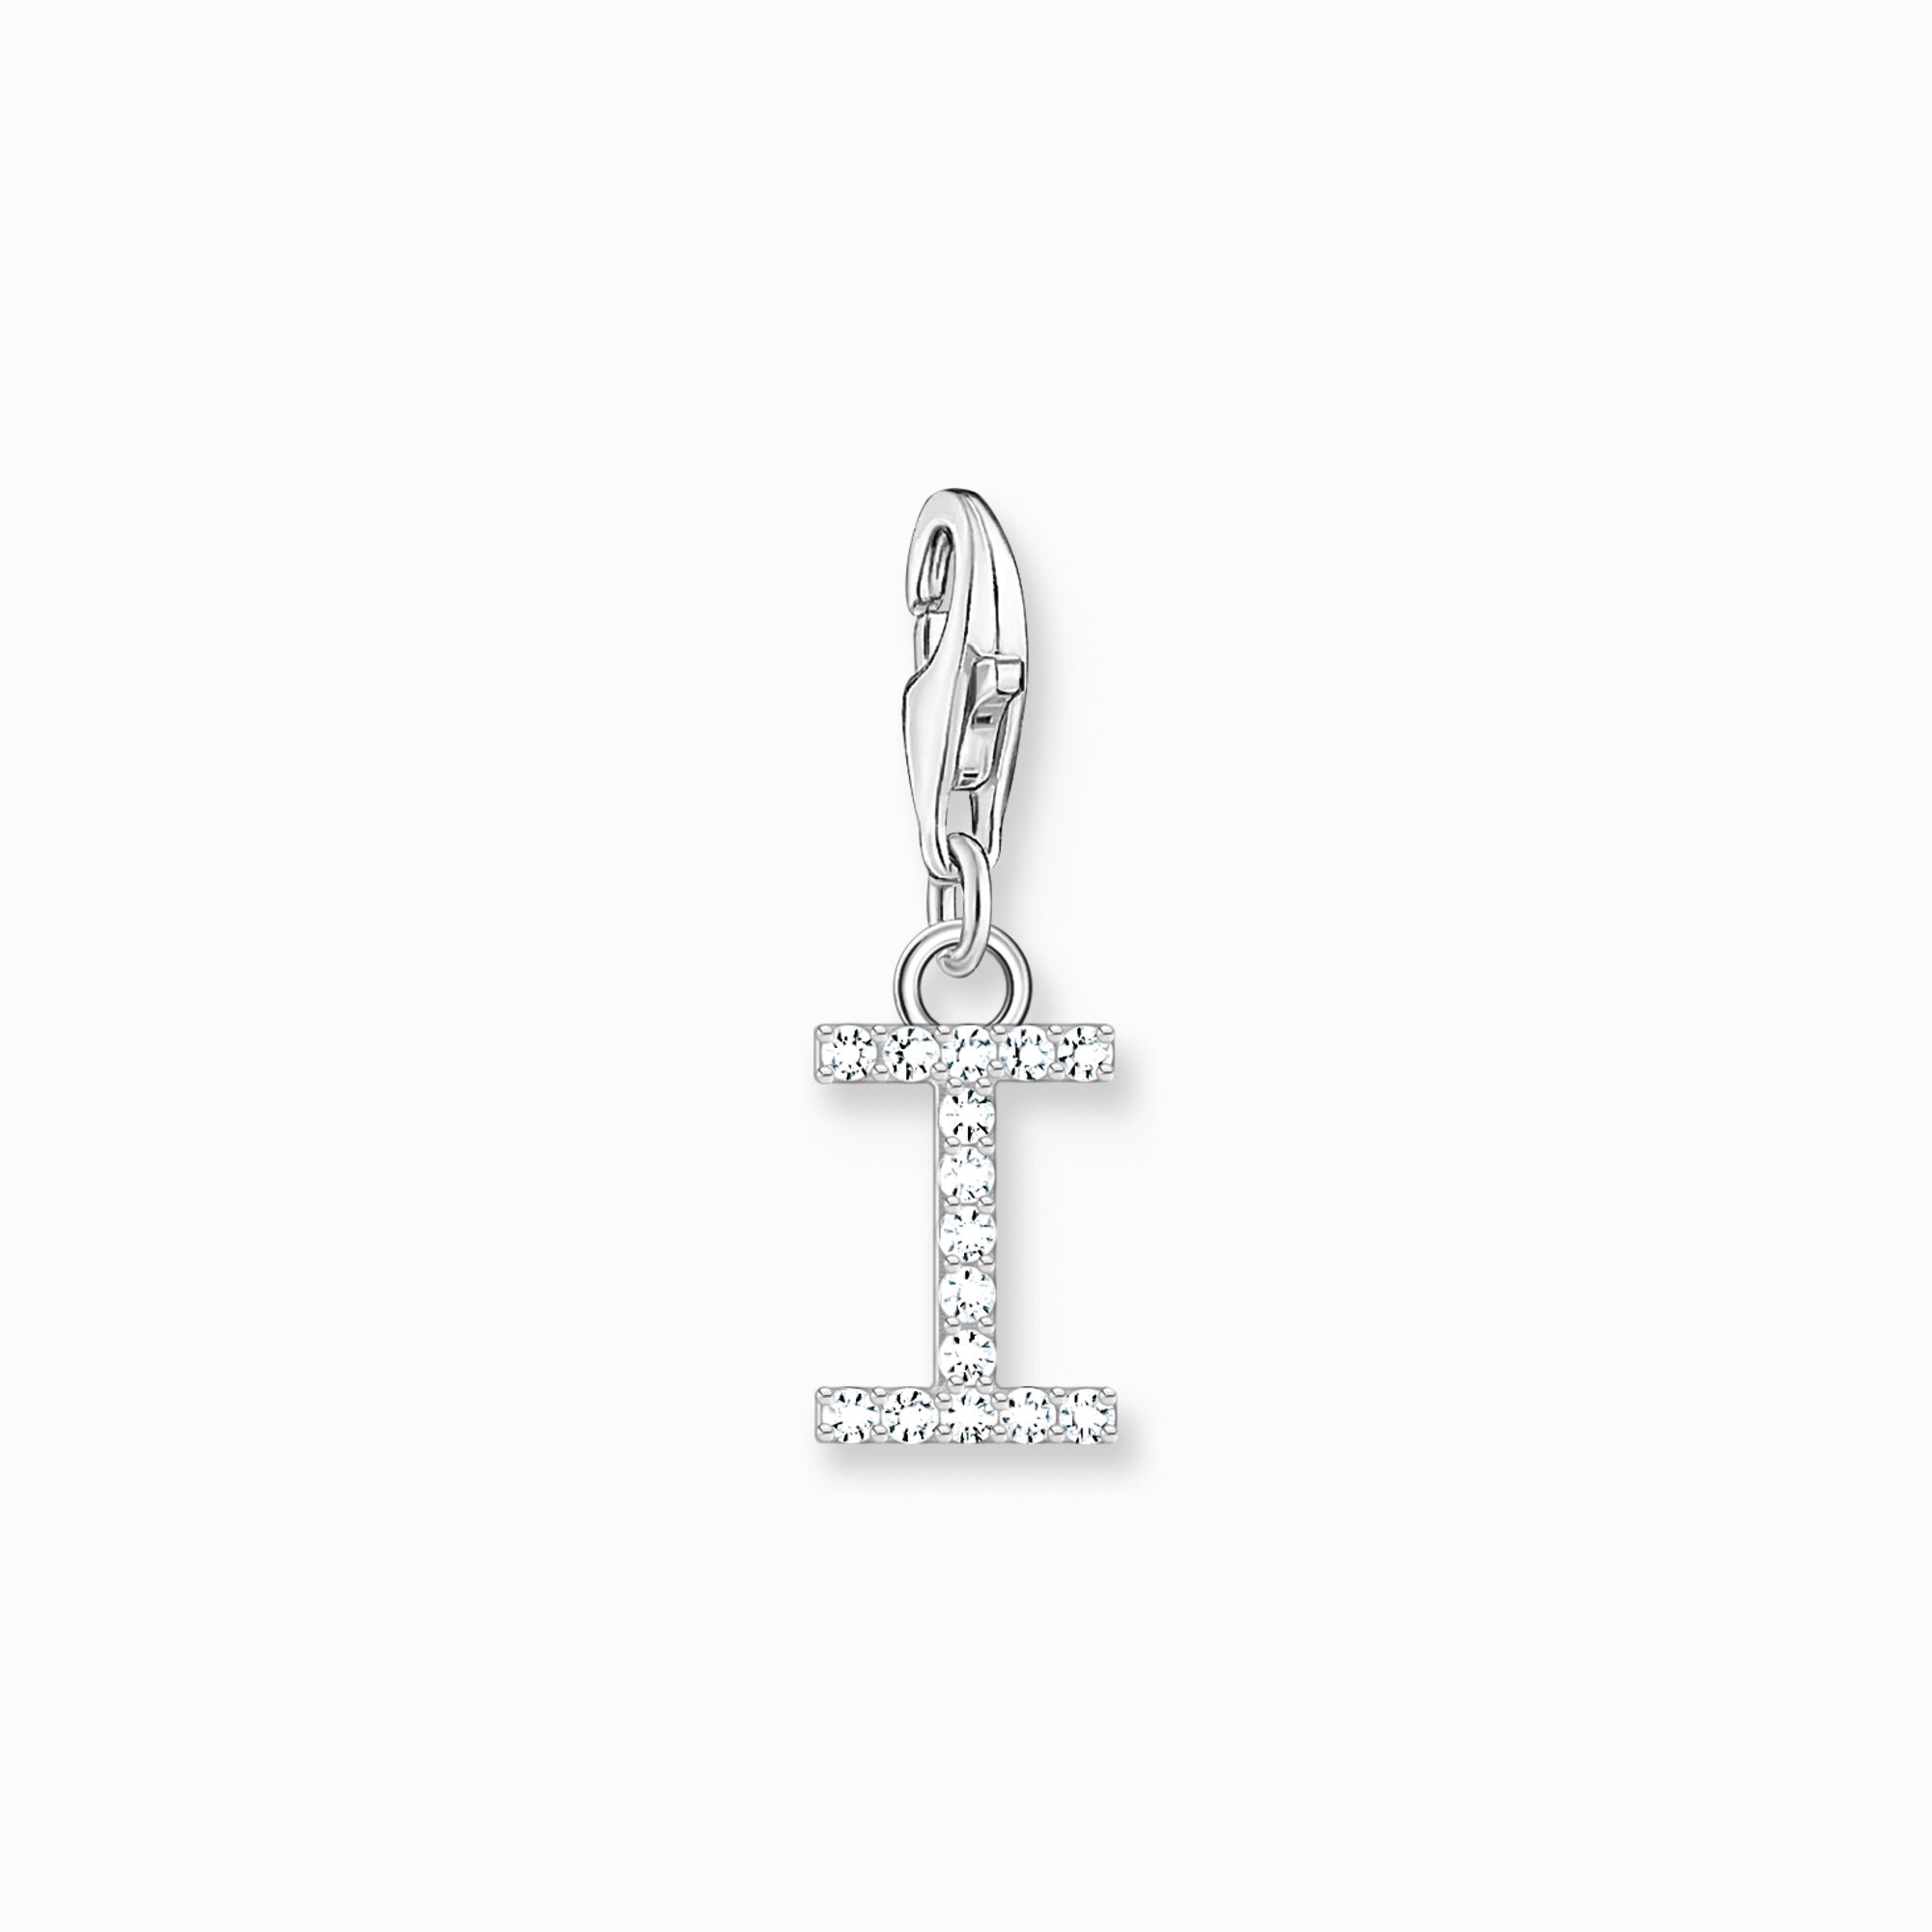 Charm pendant letter I with white stones silver from the Charm Club collection in the THOMAS SABO online store